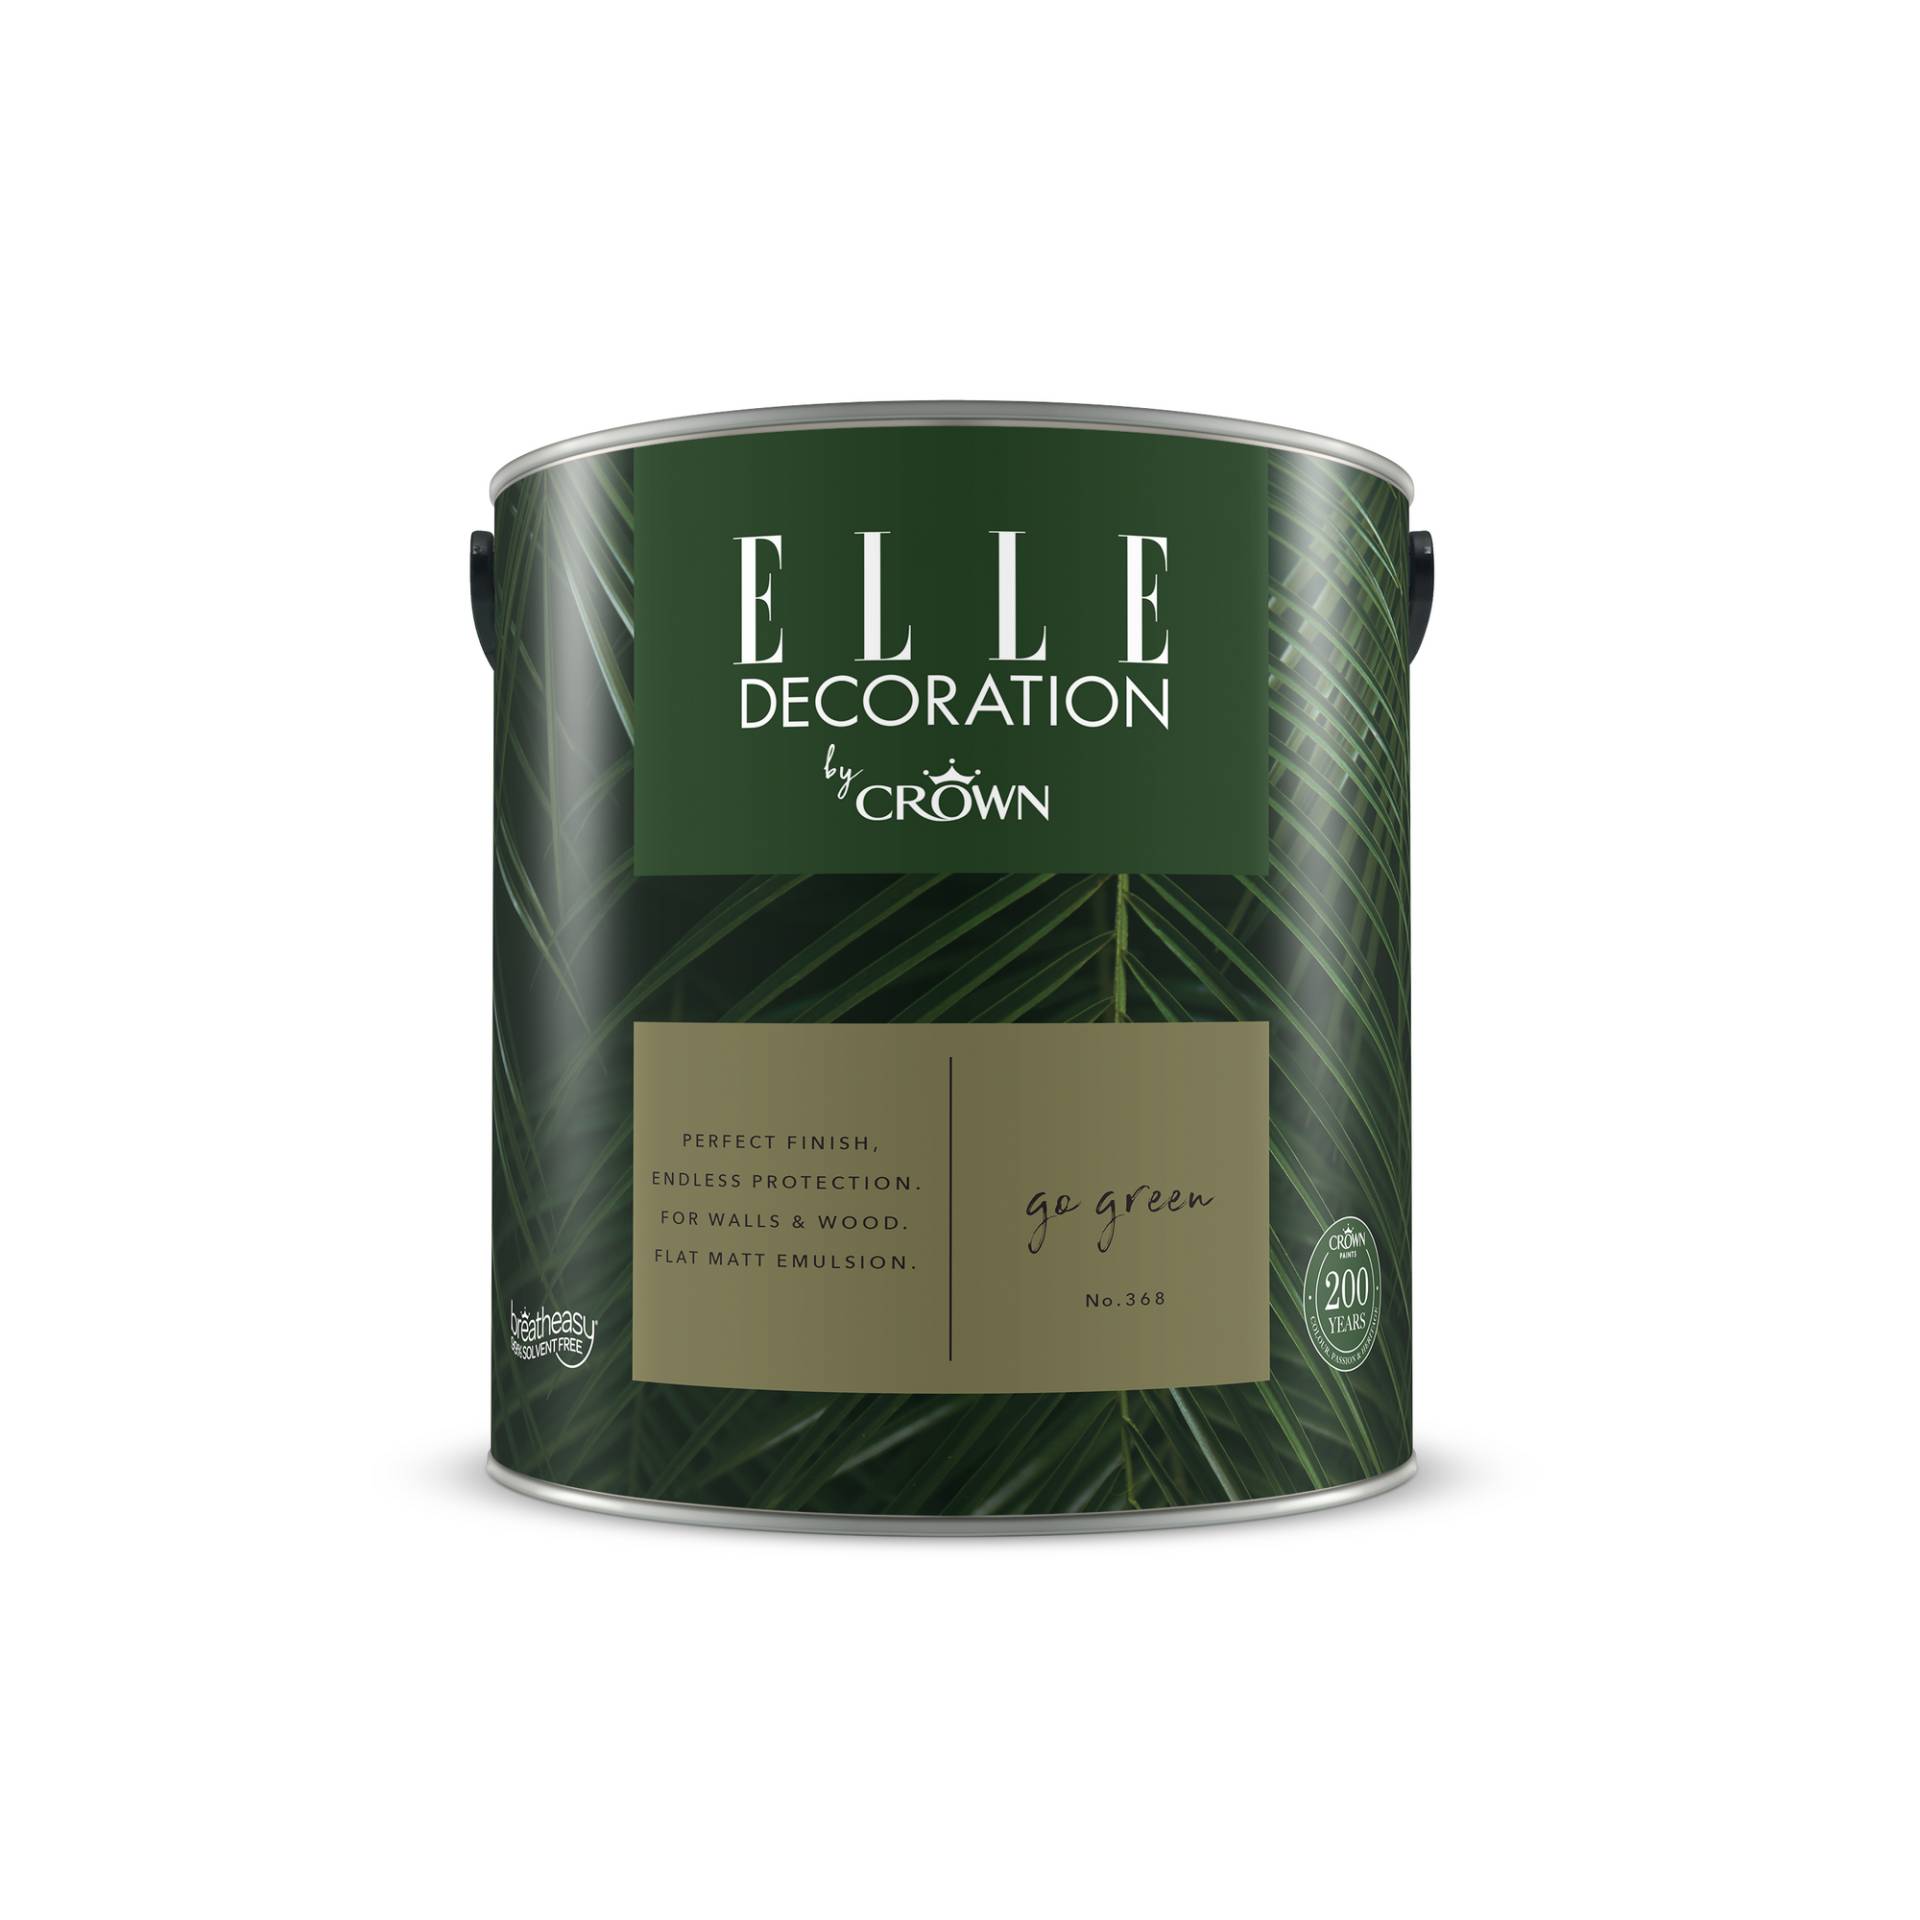 ELLE Decoration by Crown Wandfarbe 'Go Green No. 368' gelbgrün matt 2,5 l von ELLE Decoration by Crown